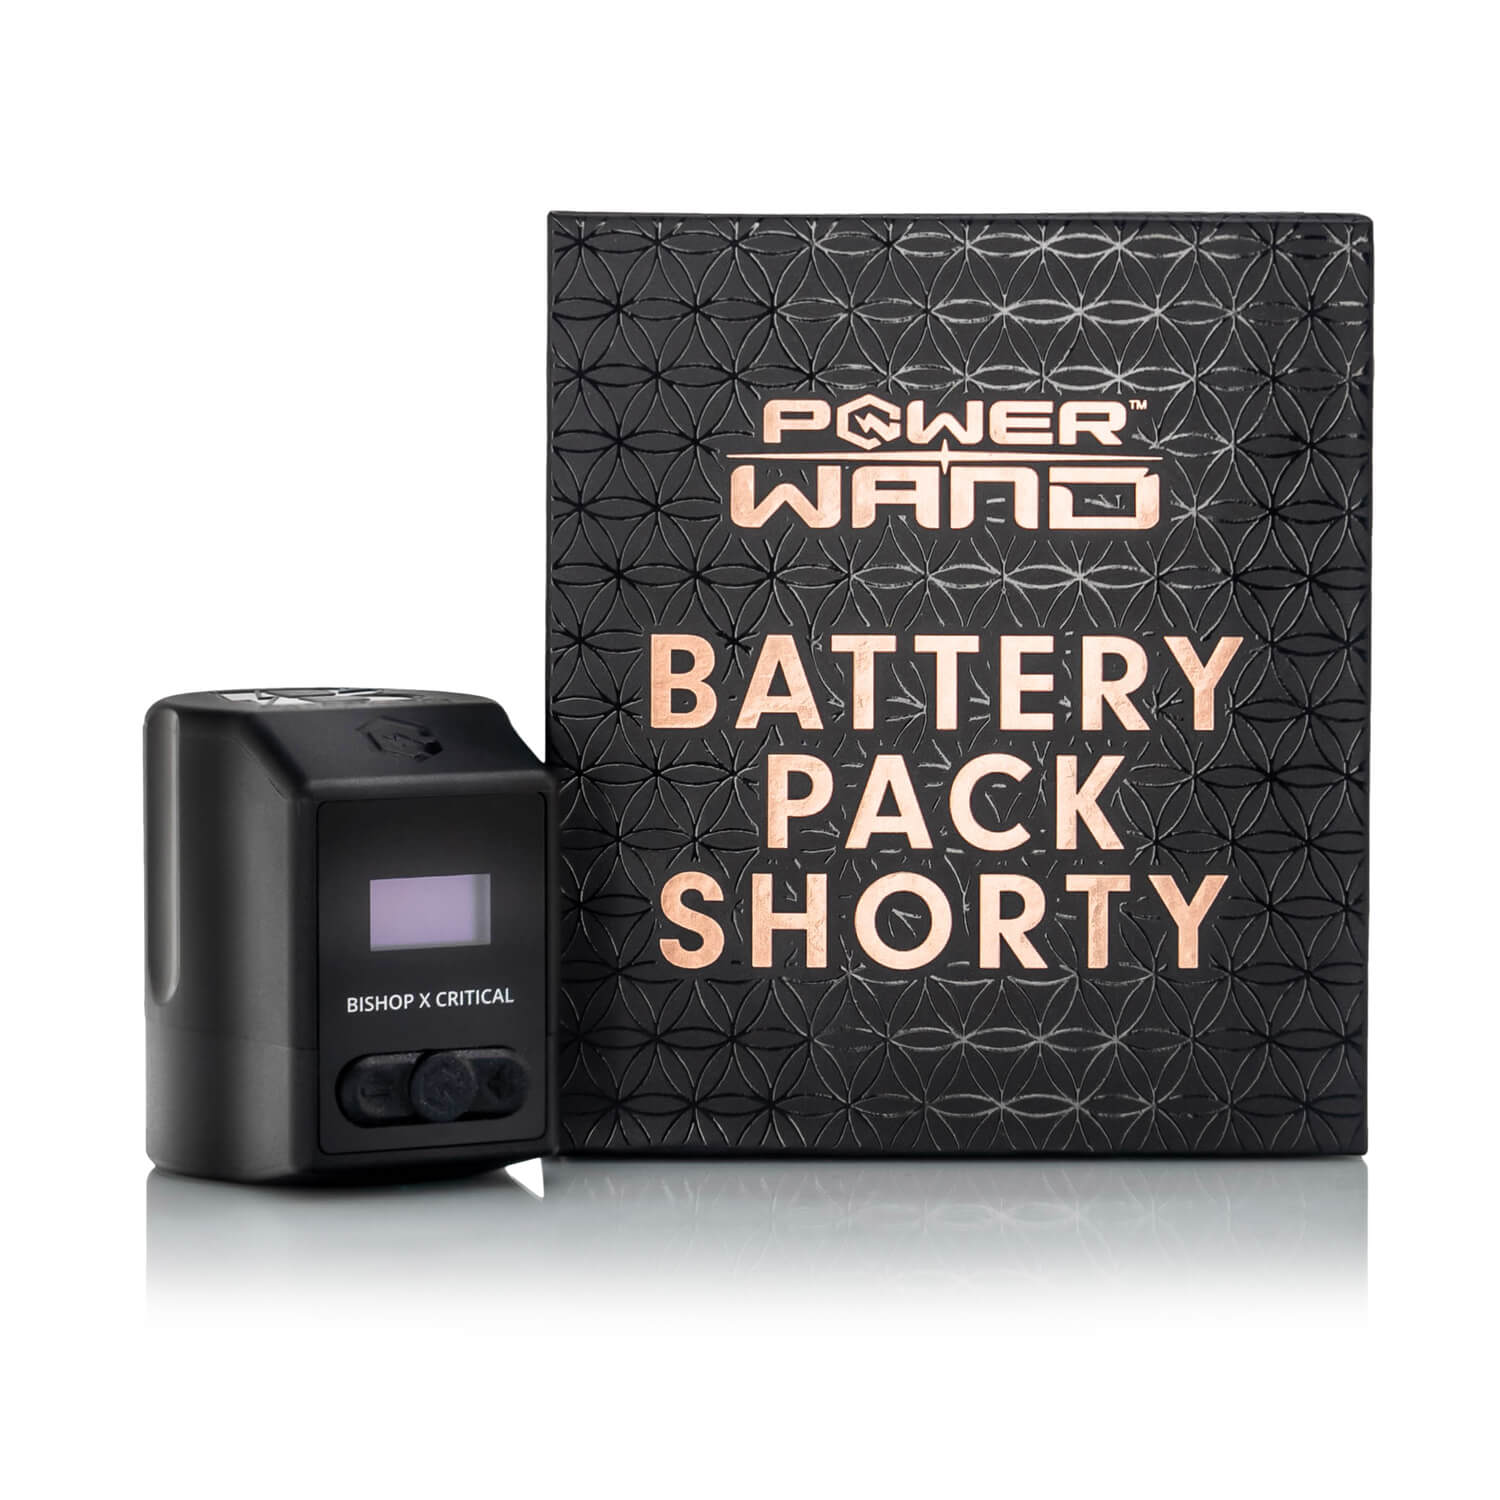  The Bishop Power Wand Battery Pack, Shorty, and RCA Adapter for Tattooing